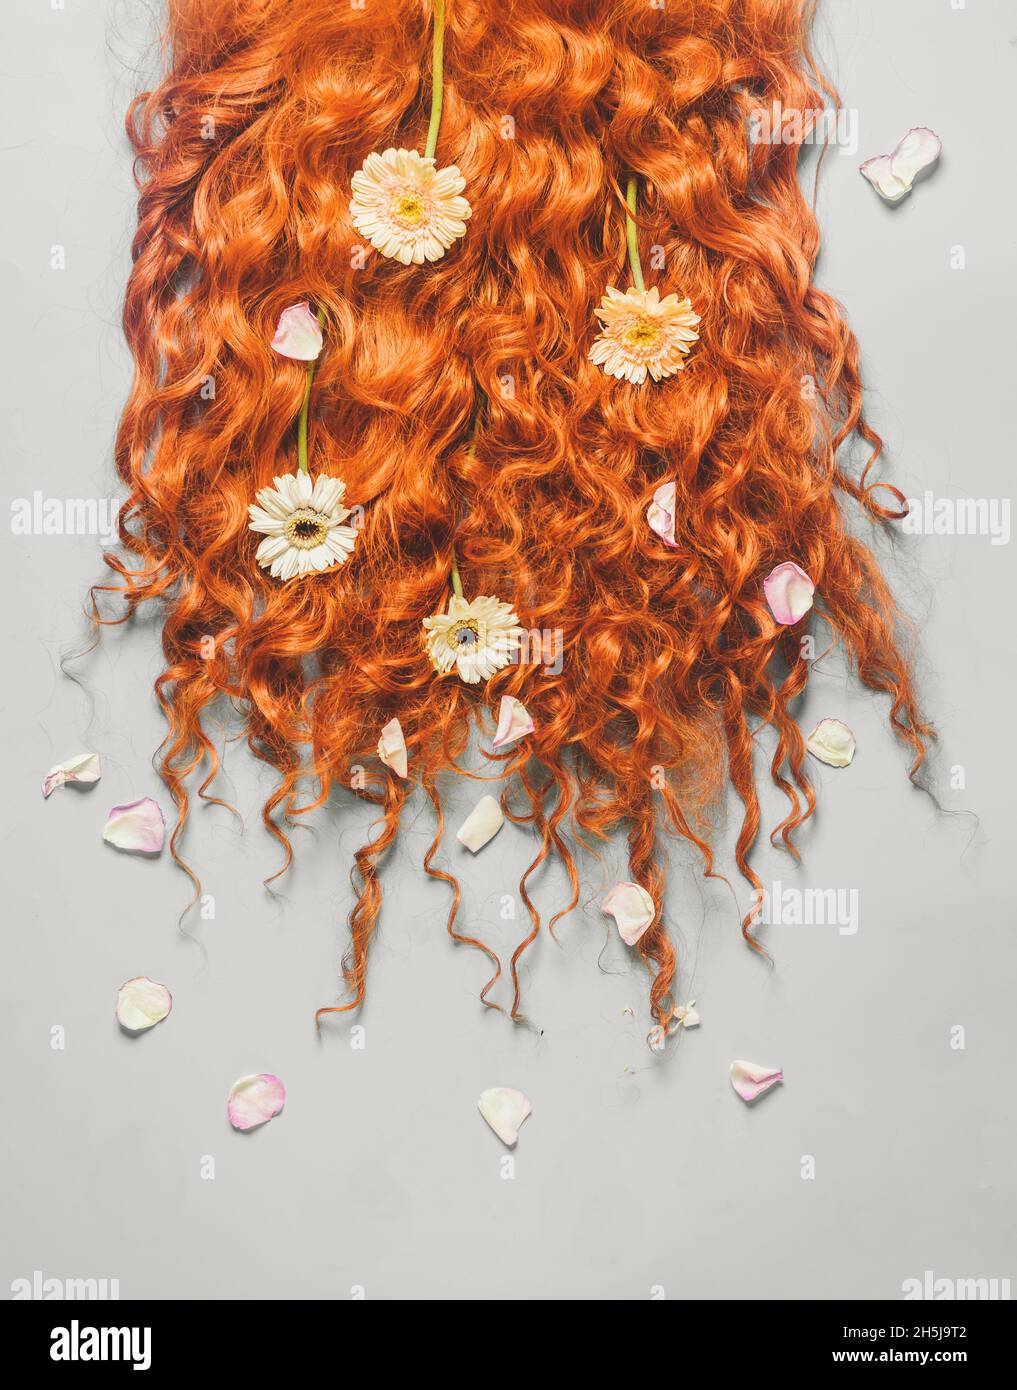 Long red curly hair with white, yellow and pink petals on pale grey background. Beauty hair concept with flowers. Hairdresser background. Top view. Stock Photo